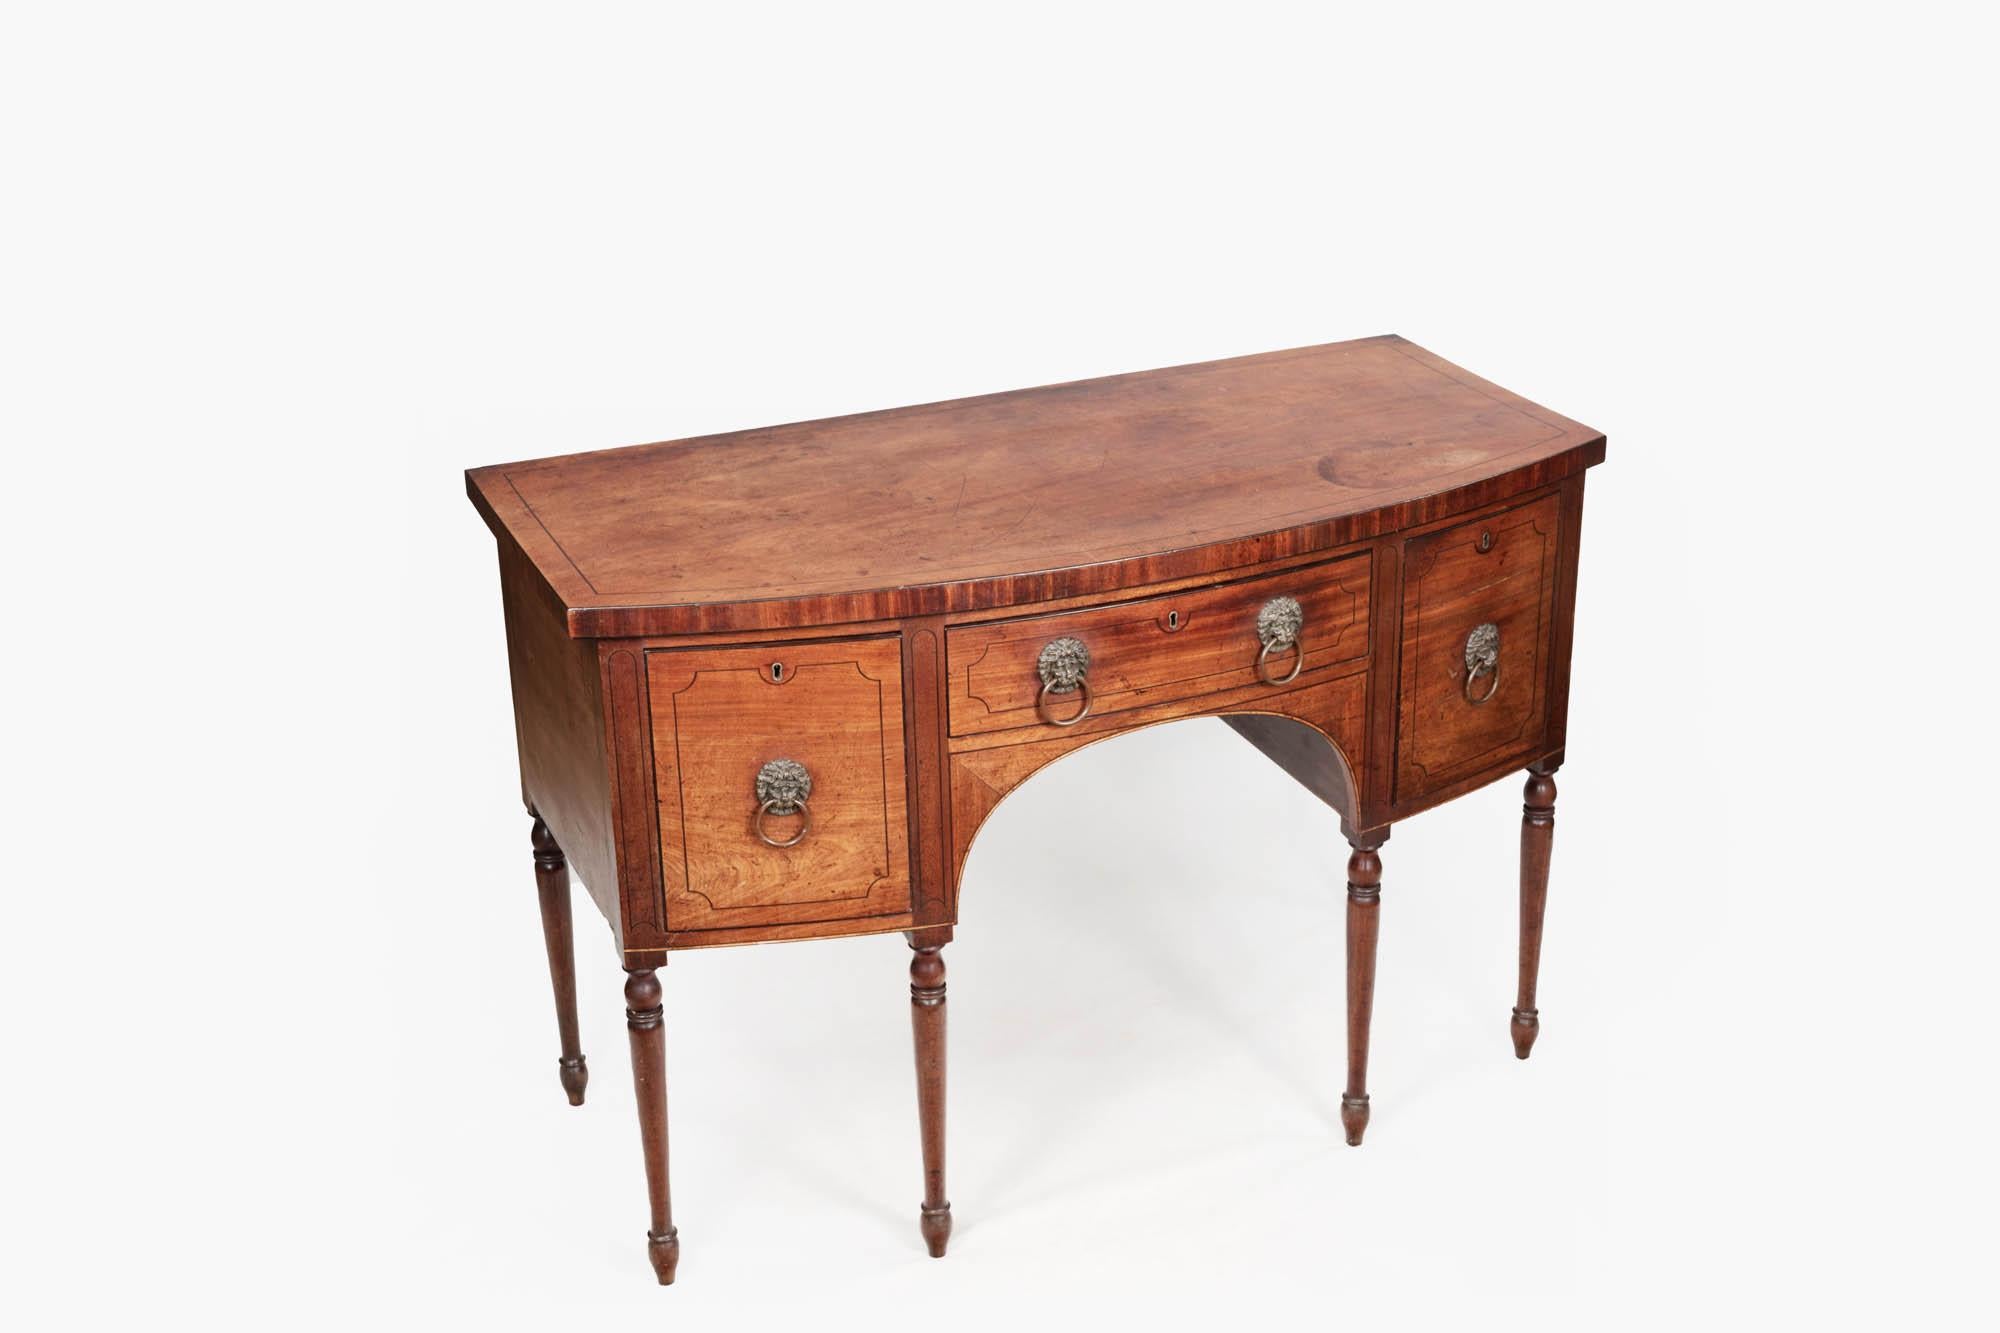 Inlay Early 19th Century Regency Bow-Fronted Mahogany Side Table For Sale